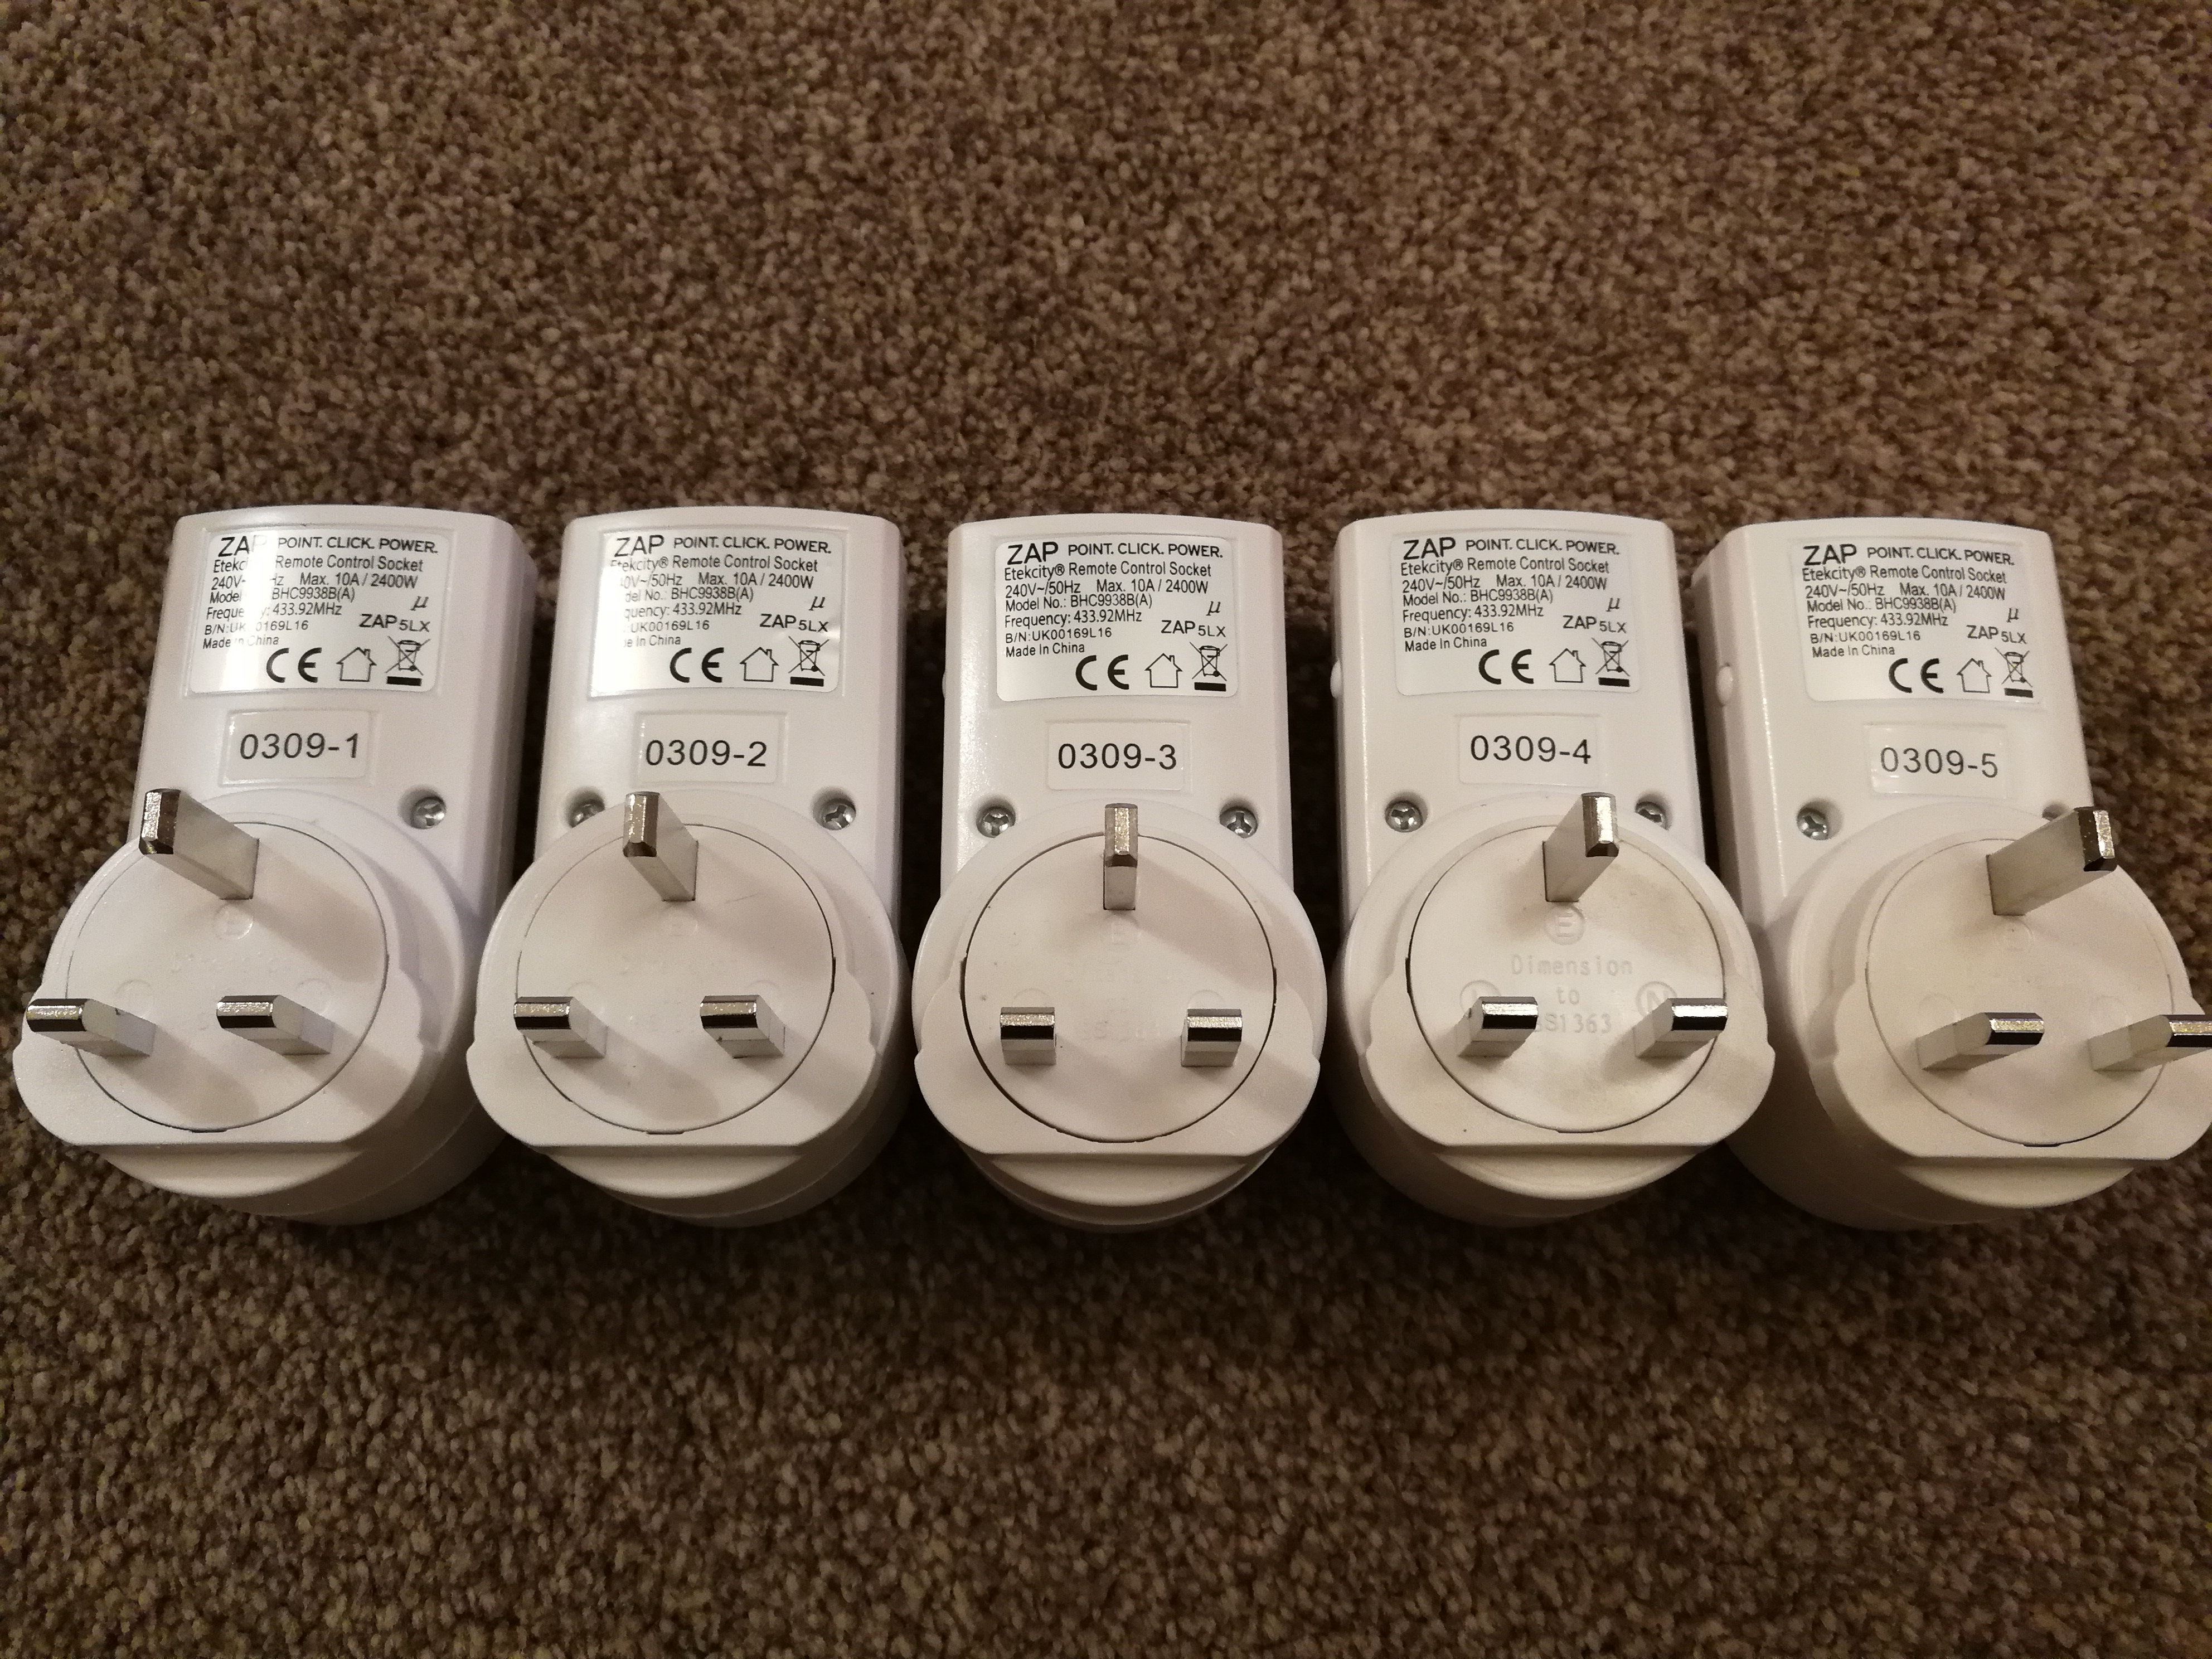 Etekcity Wireless Remote Outlet Review and Setup - Zap Control Electrical  Switches 